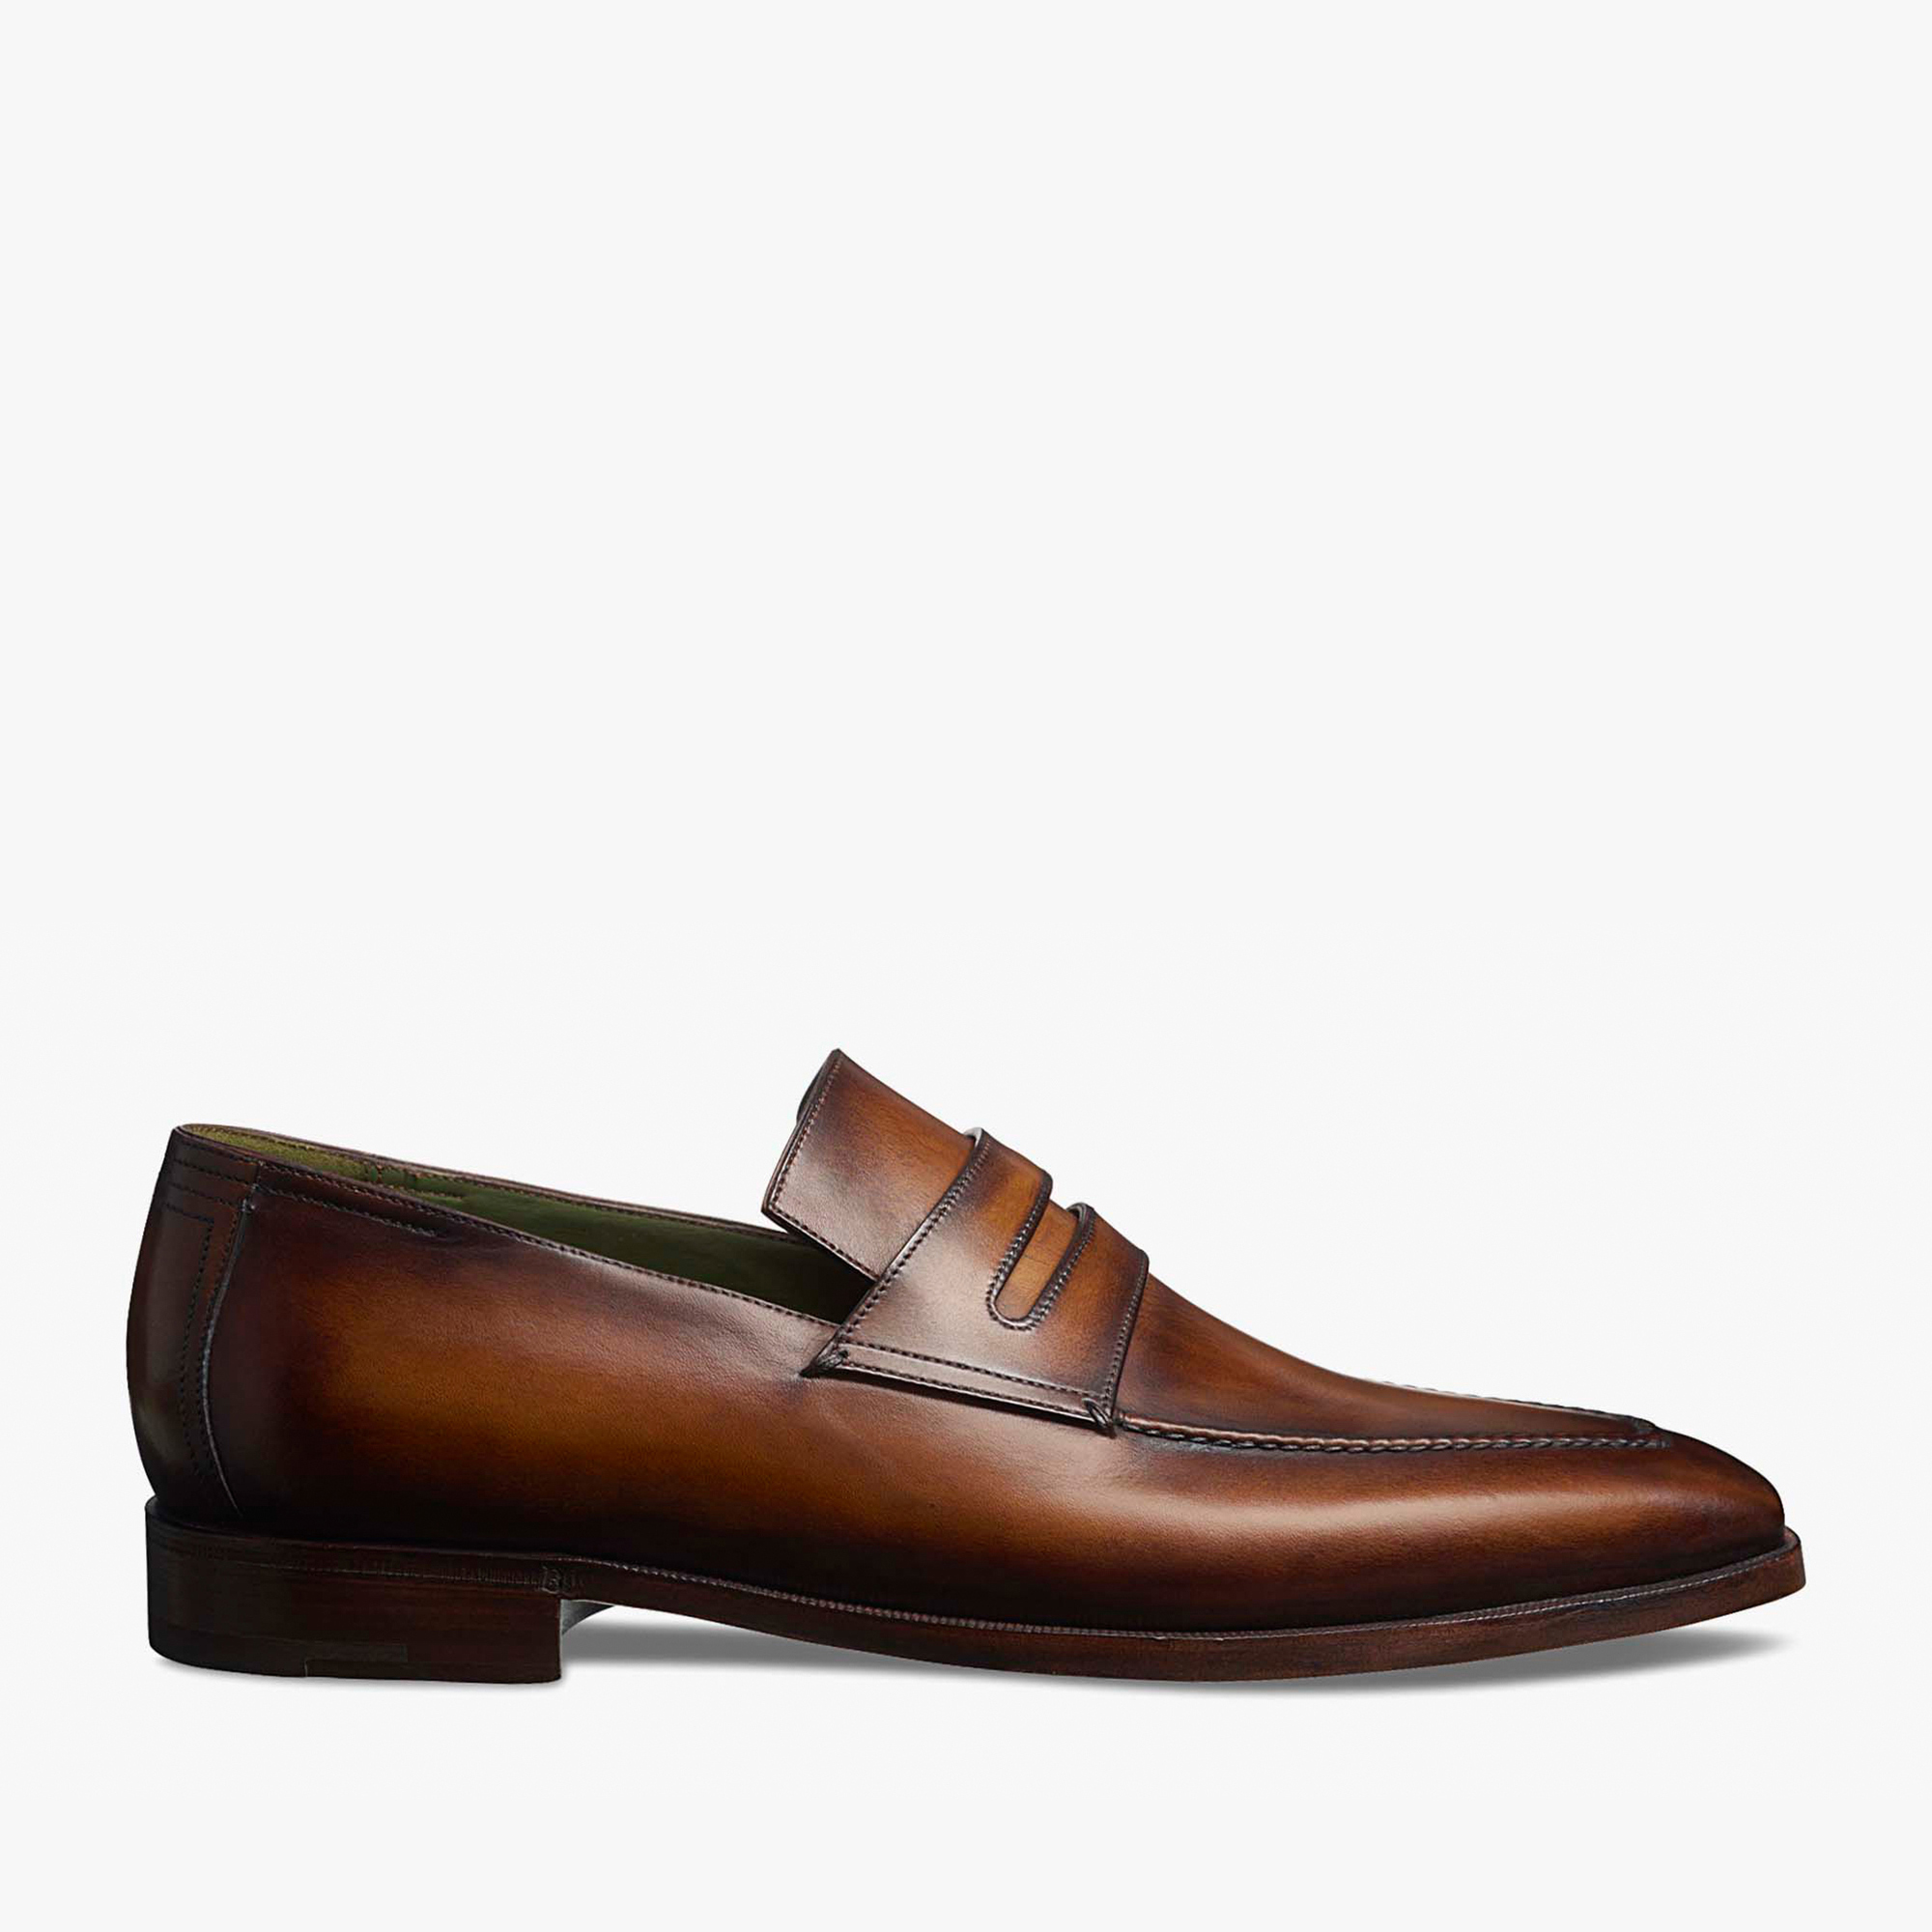 Andy Démesure Leather Loafer, TOBACCO BIS, hi-res